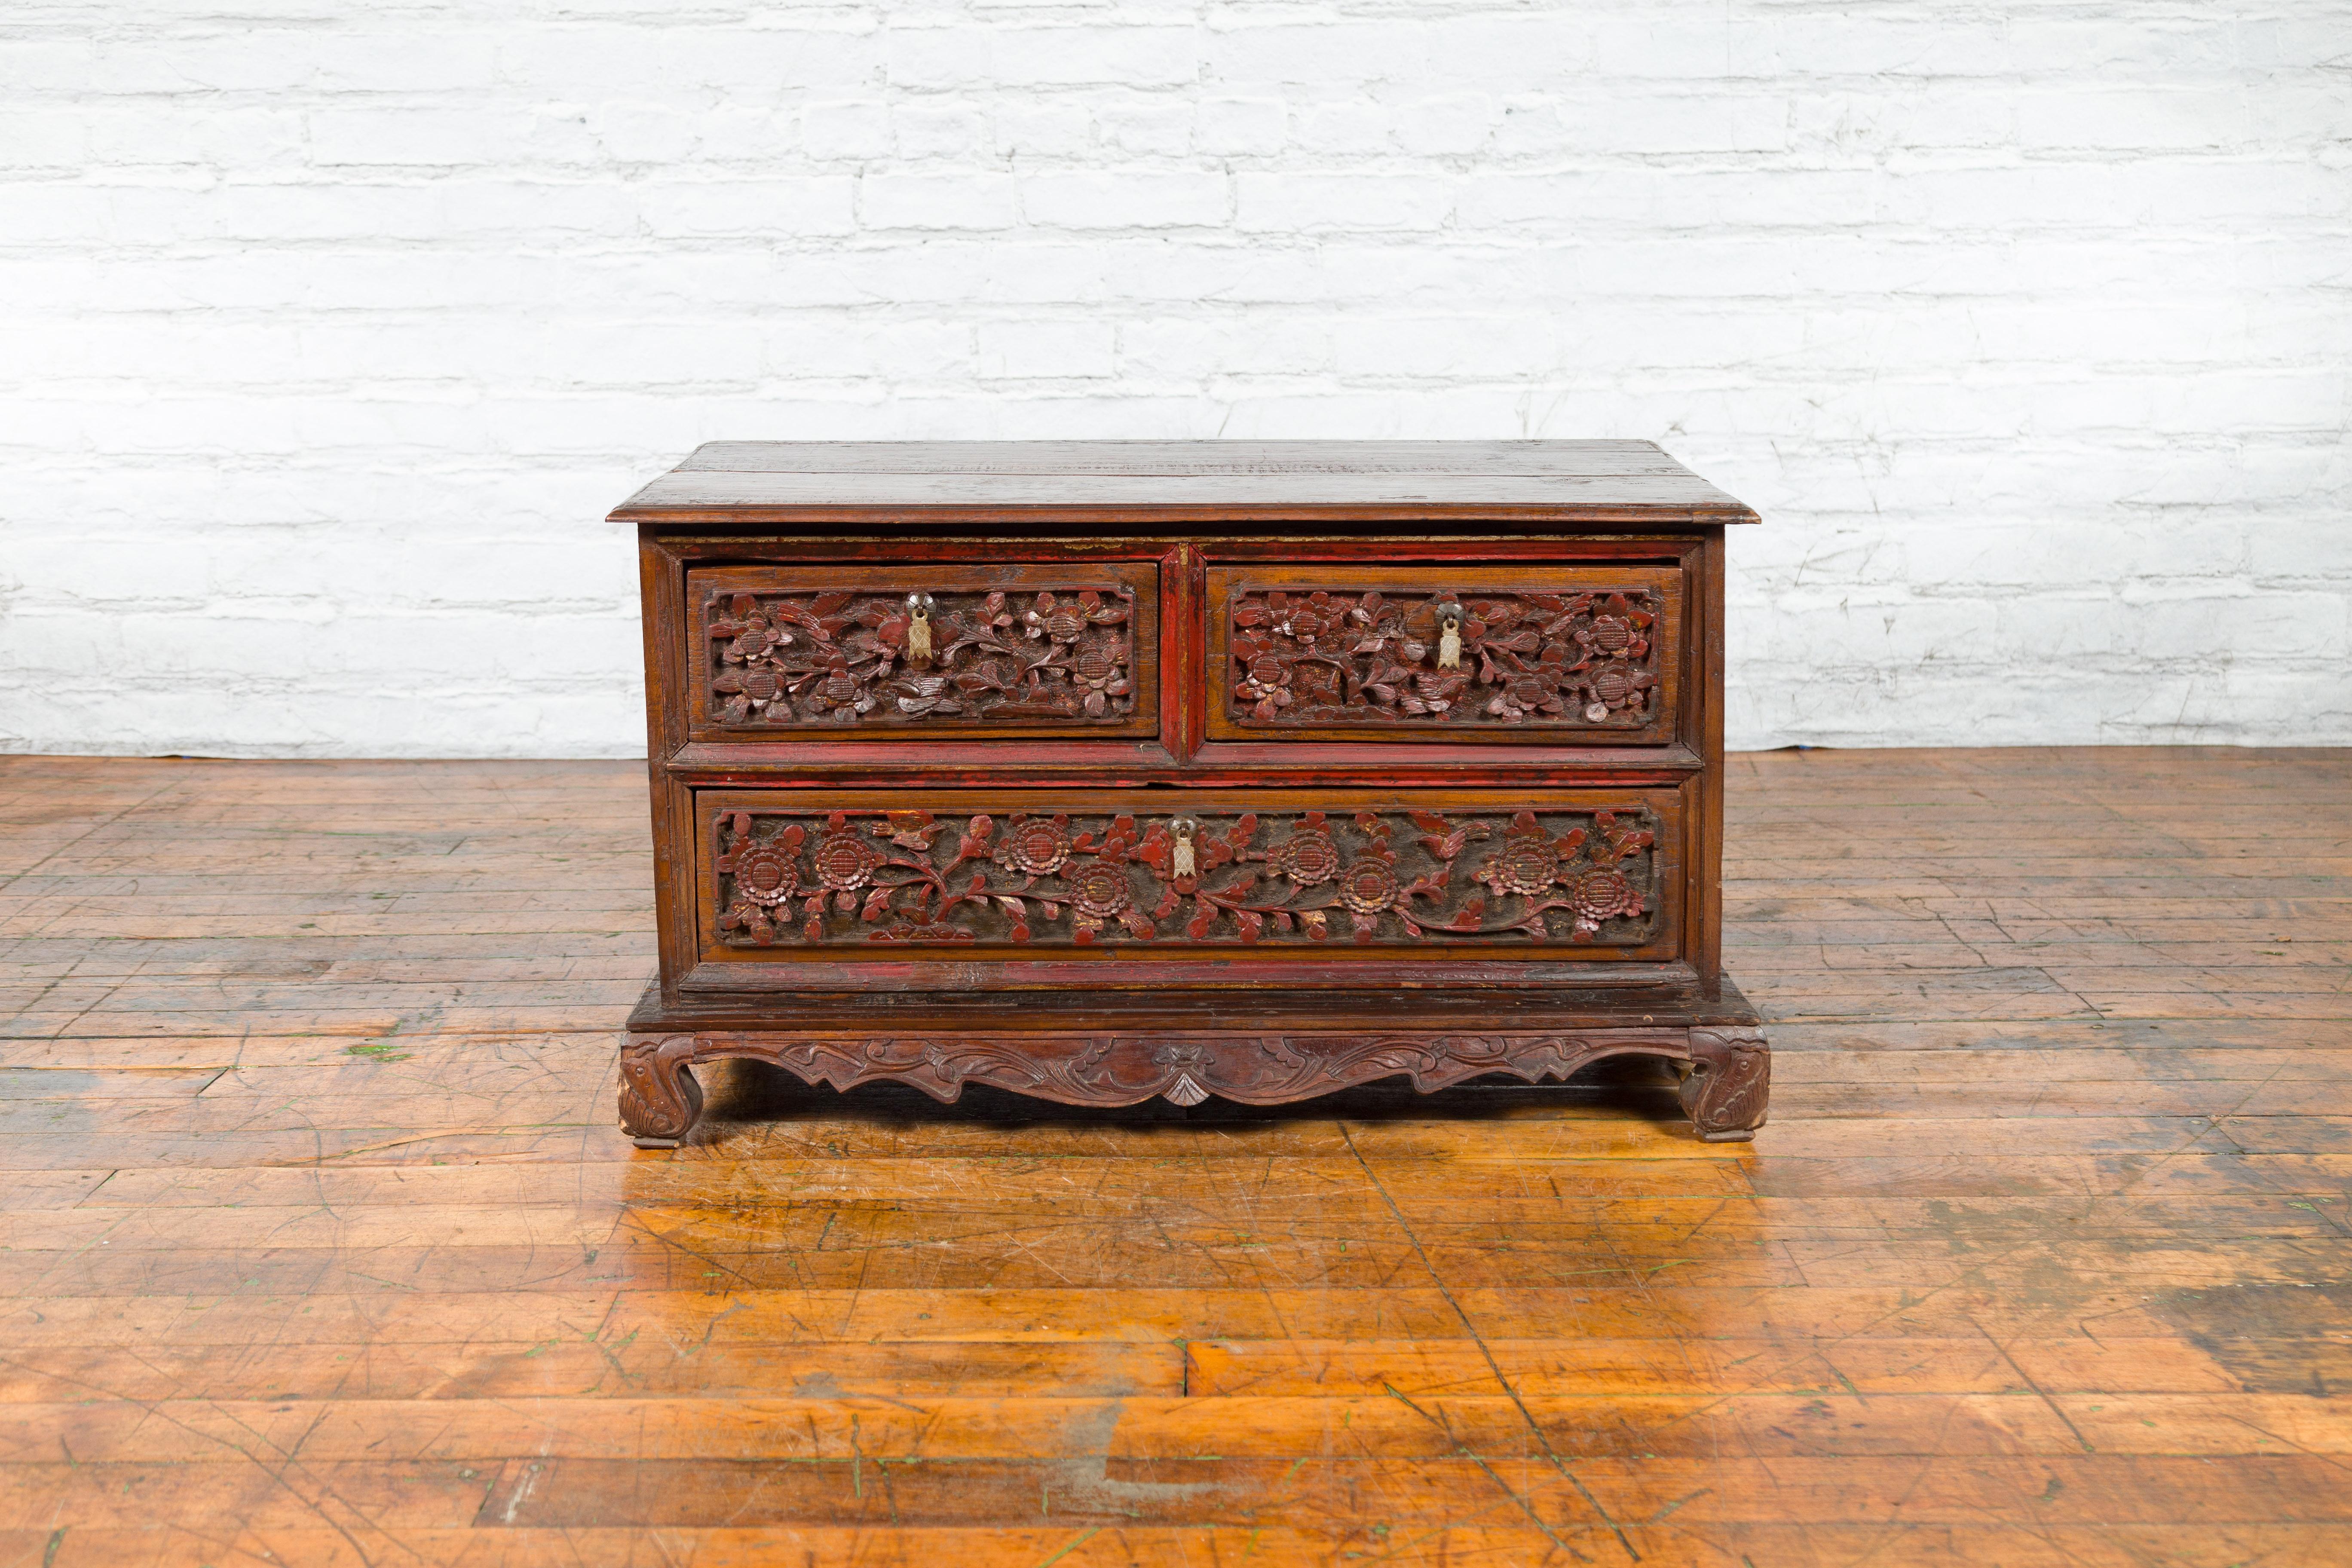 Early 20th Century Madurese Treasure Chest with Hand-Carved Floral Décor In Good Condition For Sale In Yonkers, NY